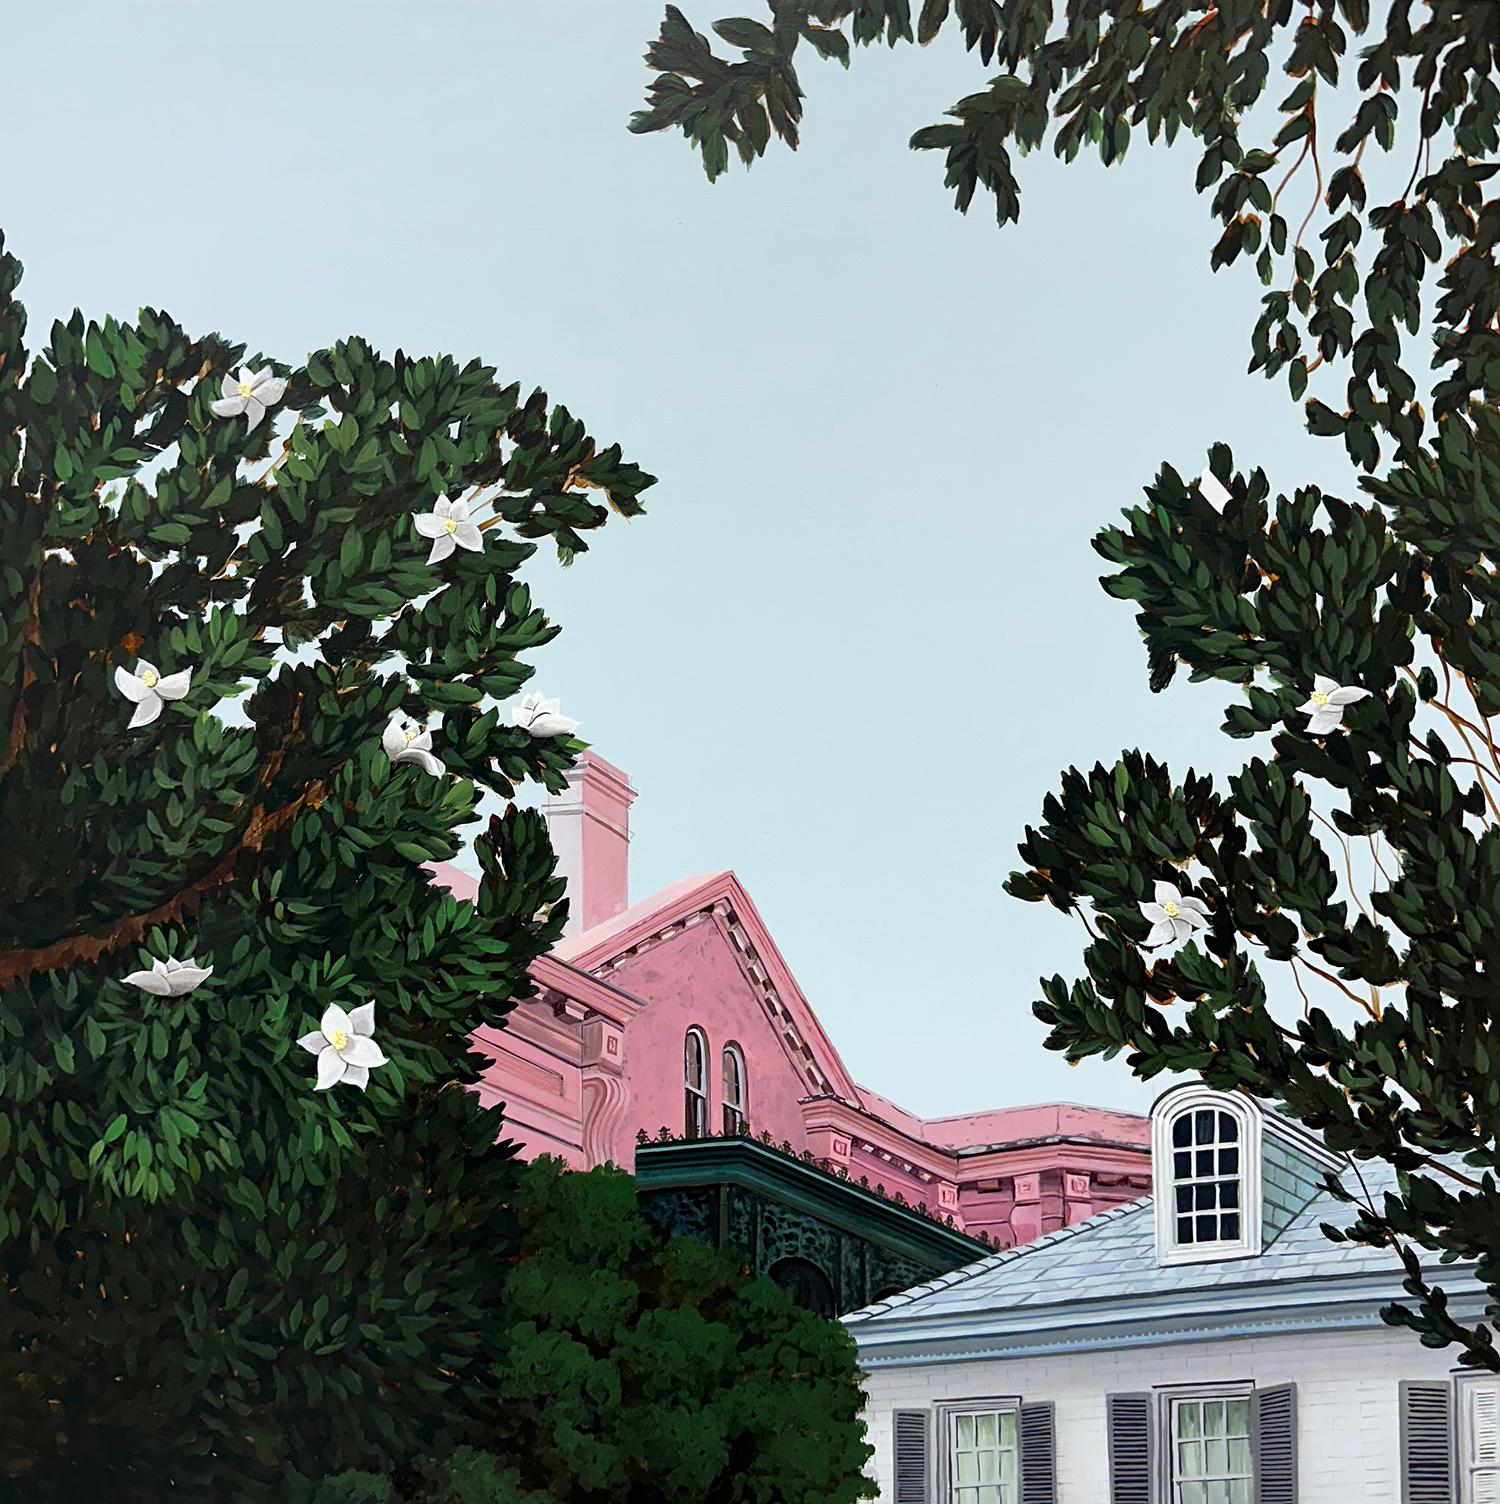 "Into the Garden (Part Two)", by Kristin Moore, is a part of her 2024 solo exhibition, “Through the Bayou, Into the Garden”, at Ferrara Showman Gallery. Marking a transition from her previous work, "Into the Garden (Part Two)" shows Kristin Moore